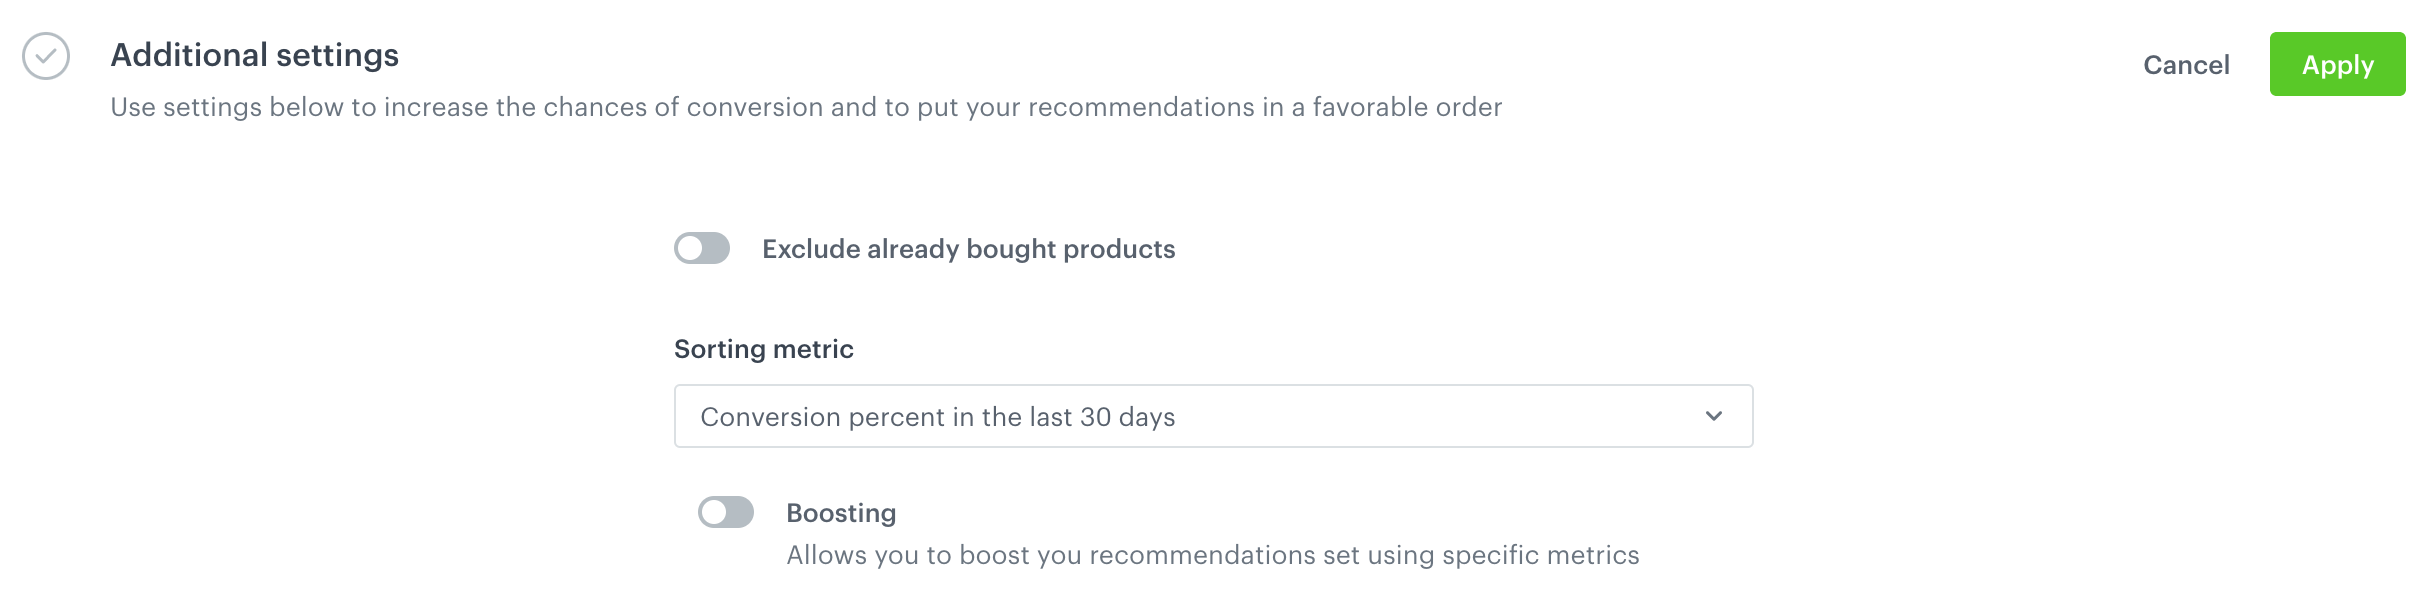 A metric that arranges the order of the items in the recommendation according to the conversion percentage